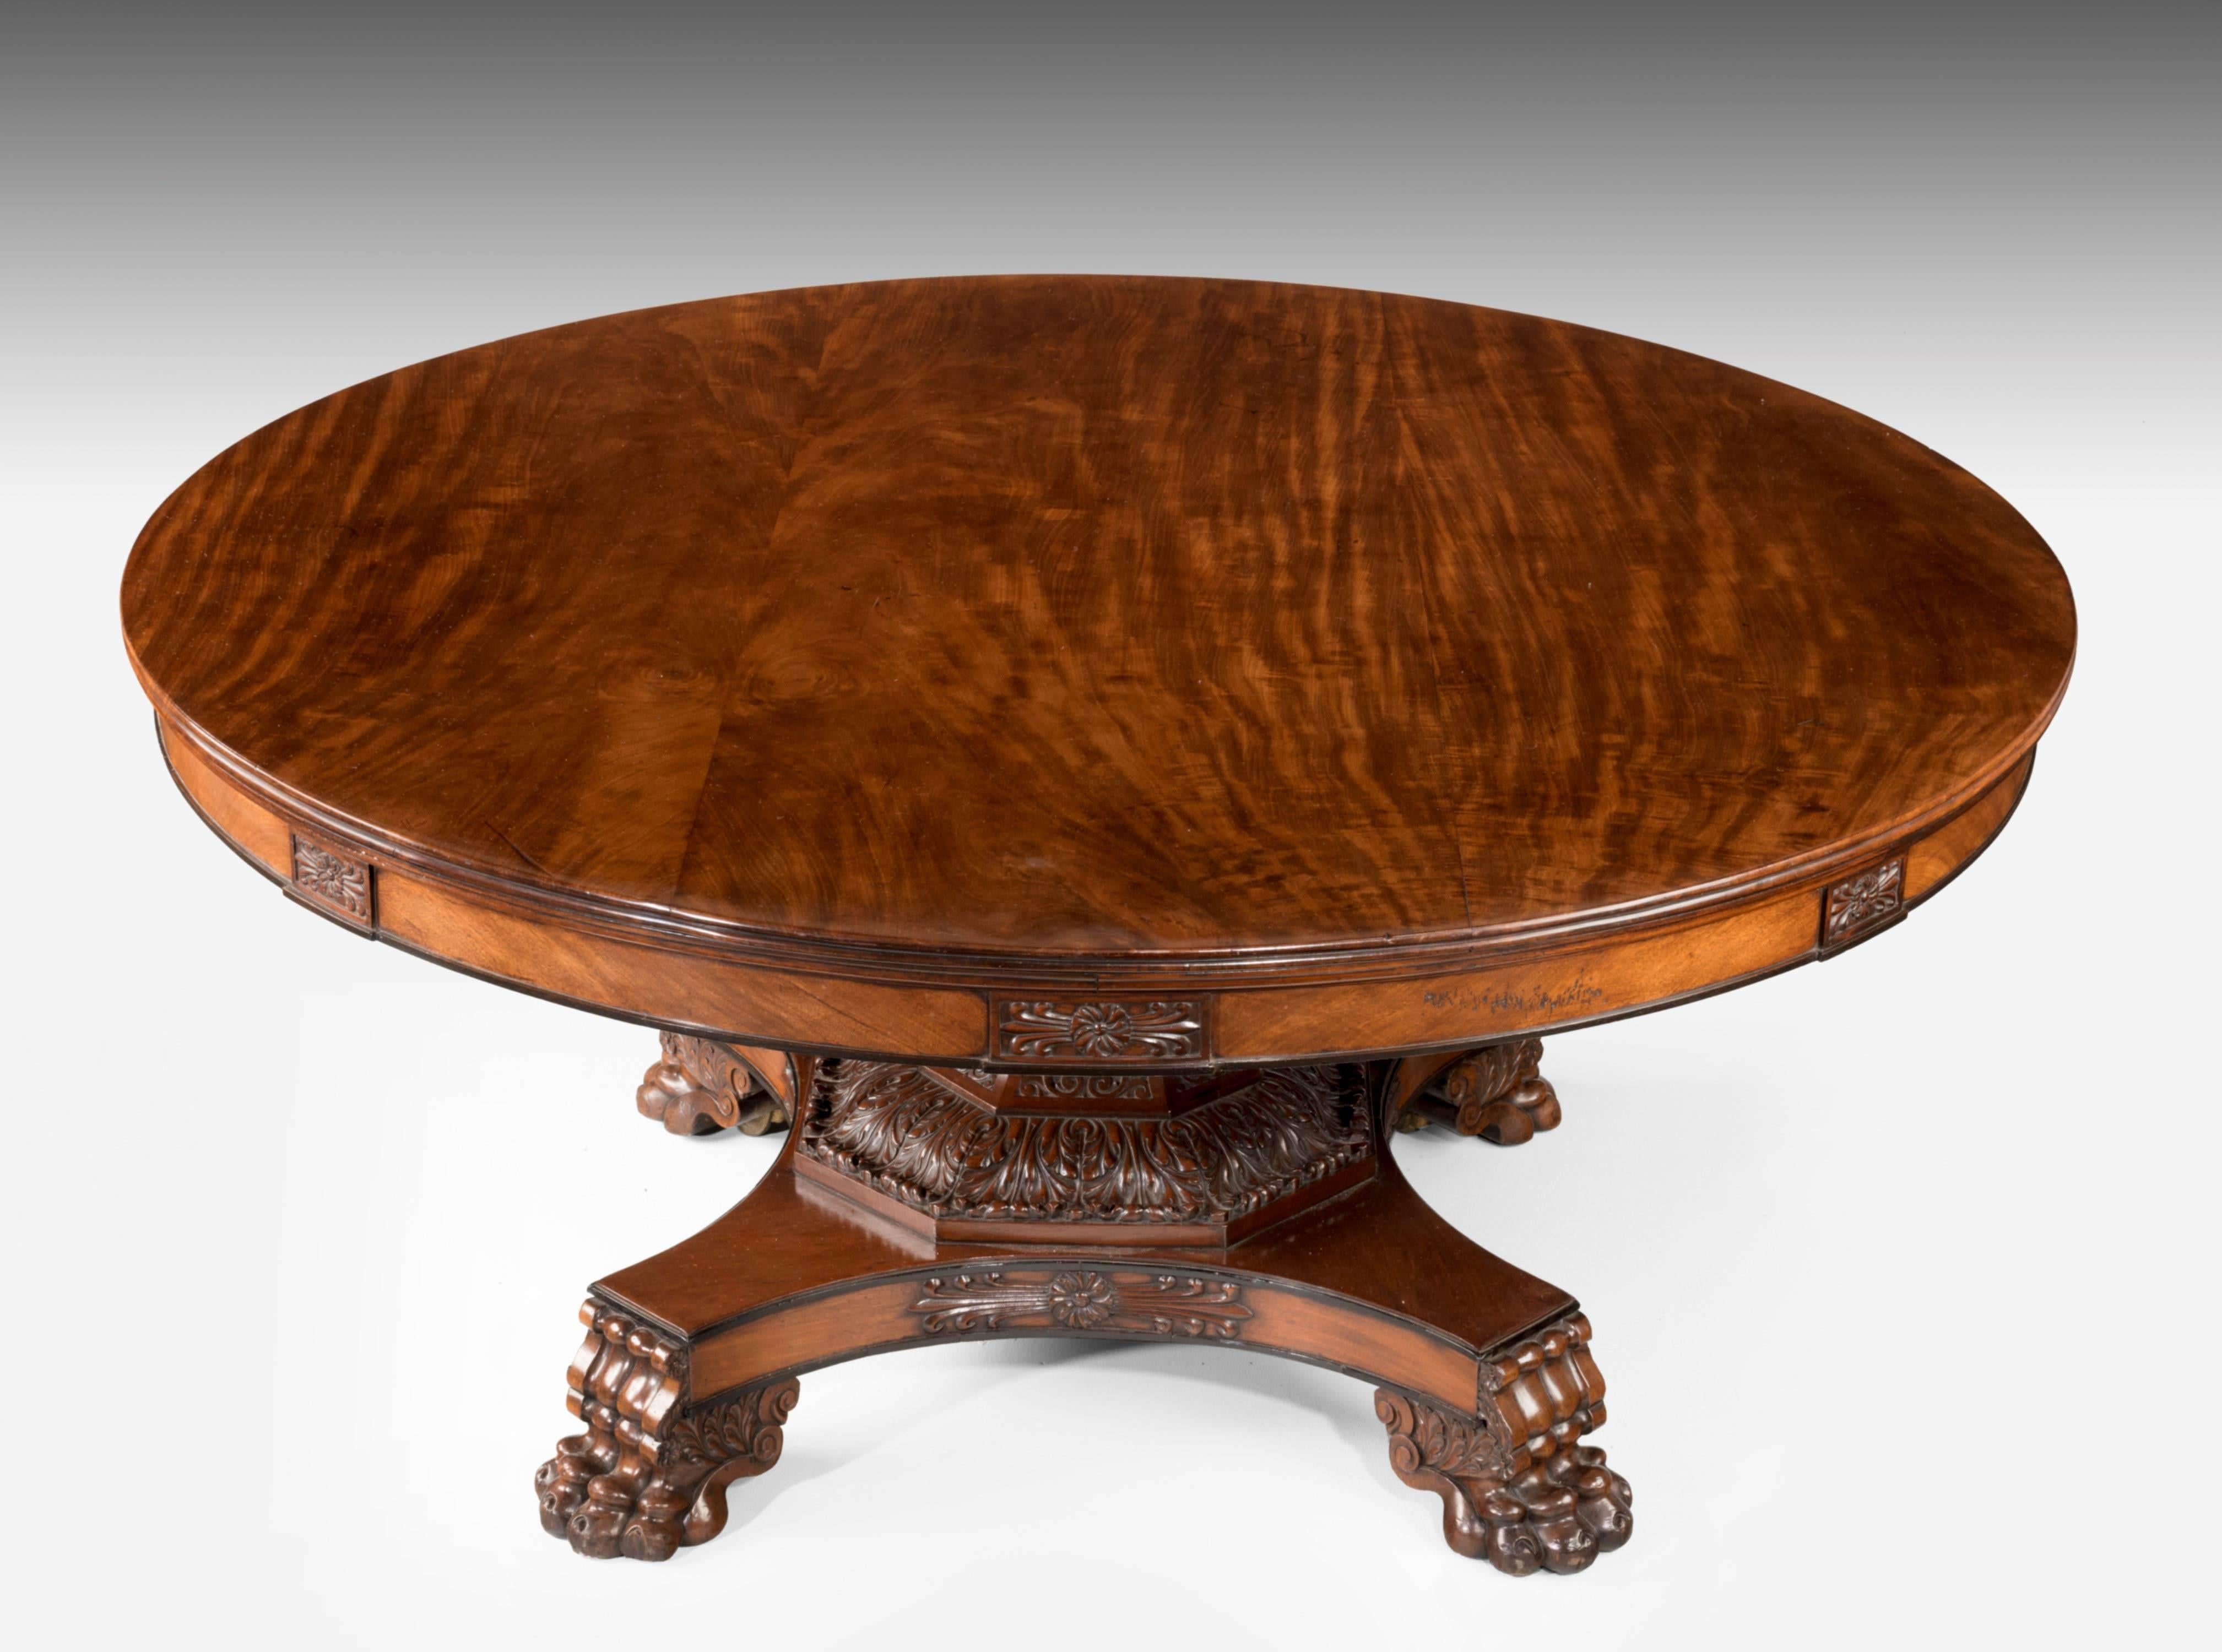 Quite outstanding Regency period mahogany large circular table. Extraordinary large size quite cable of seating 10 to 12 people. The base and centre section superbly carved in great depth with the finest quality mahogany. Typical of furniture coming